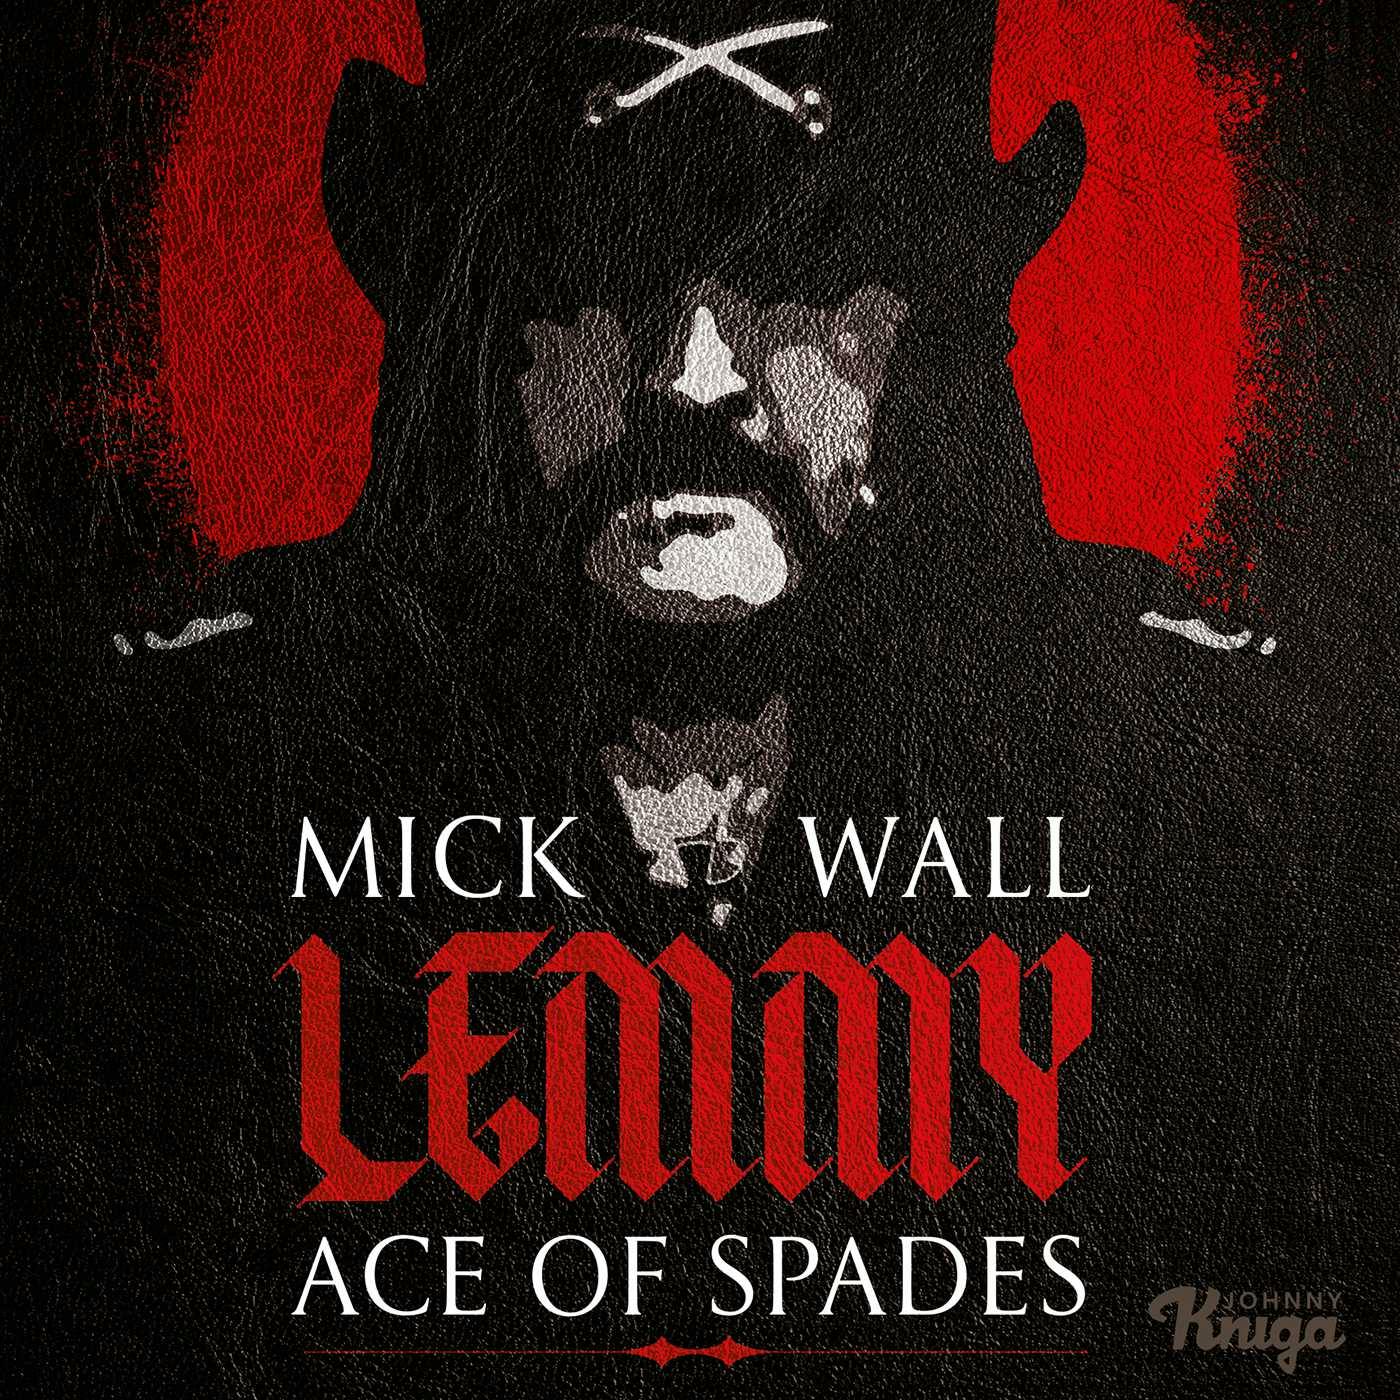 Lemmy: The Ace of Spades - undefined